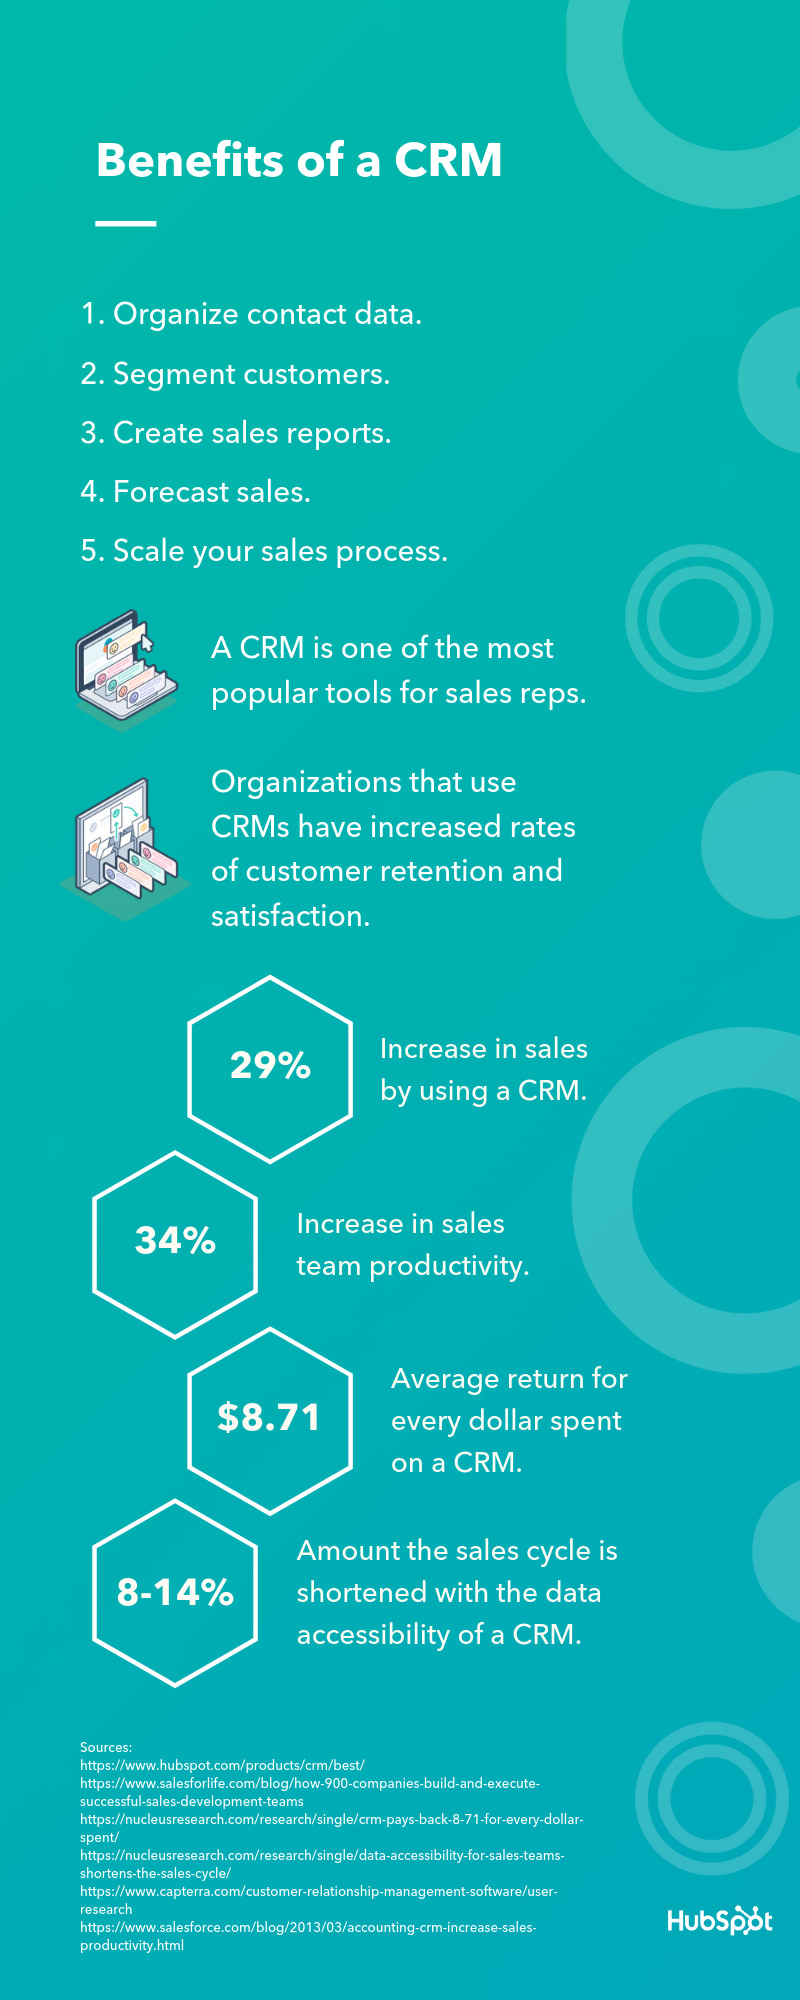 Benefits of Using CRM for Mortgage Brokers